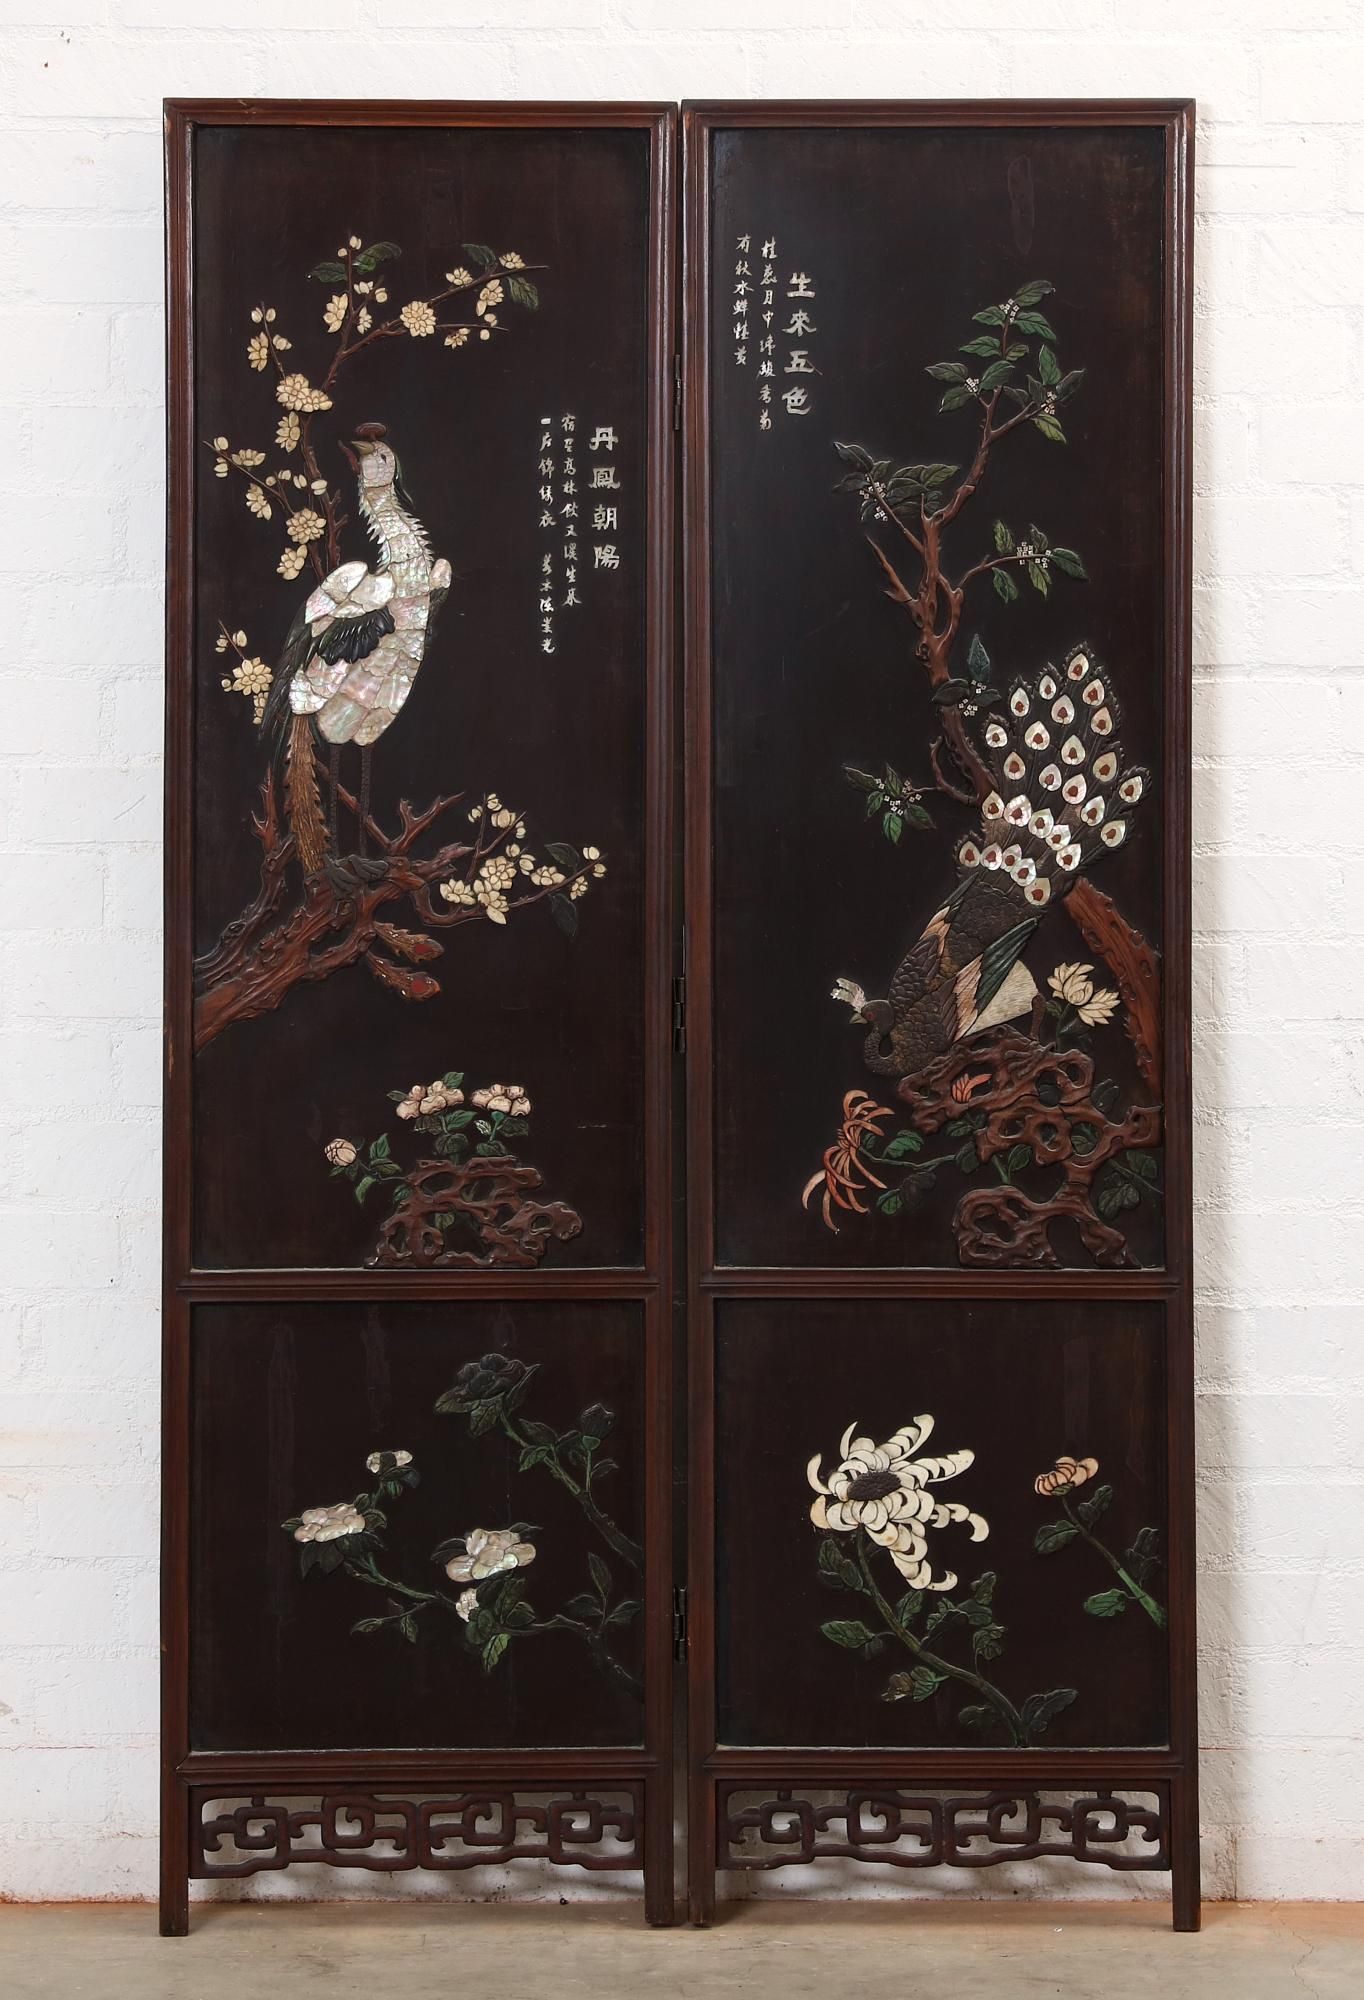 A LARGE TWO PANEL HARDSTONE INLAID 2fb28f2